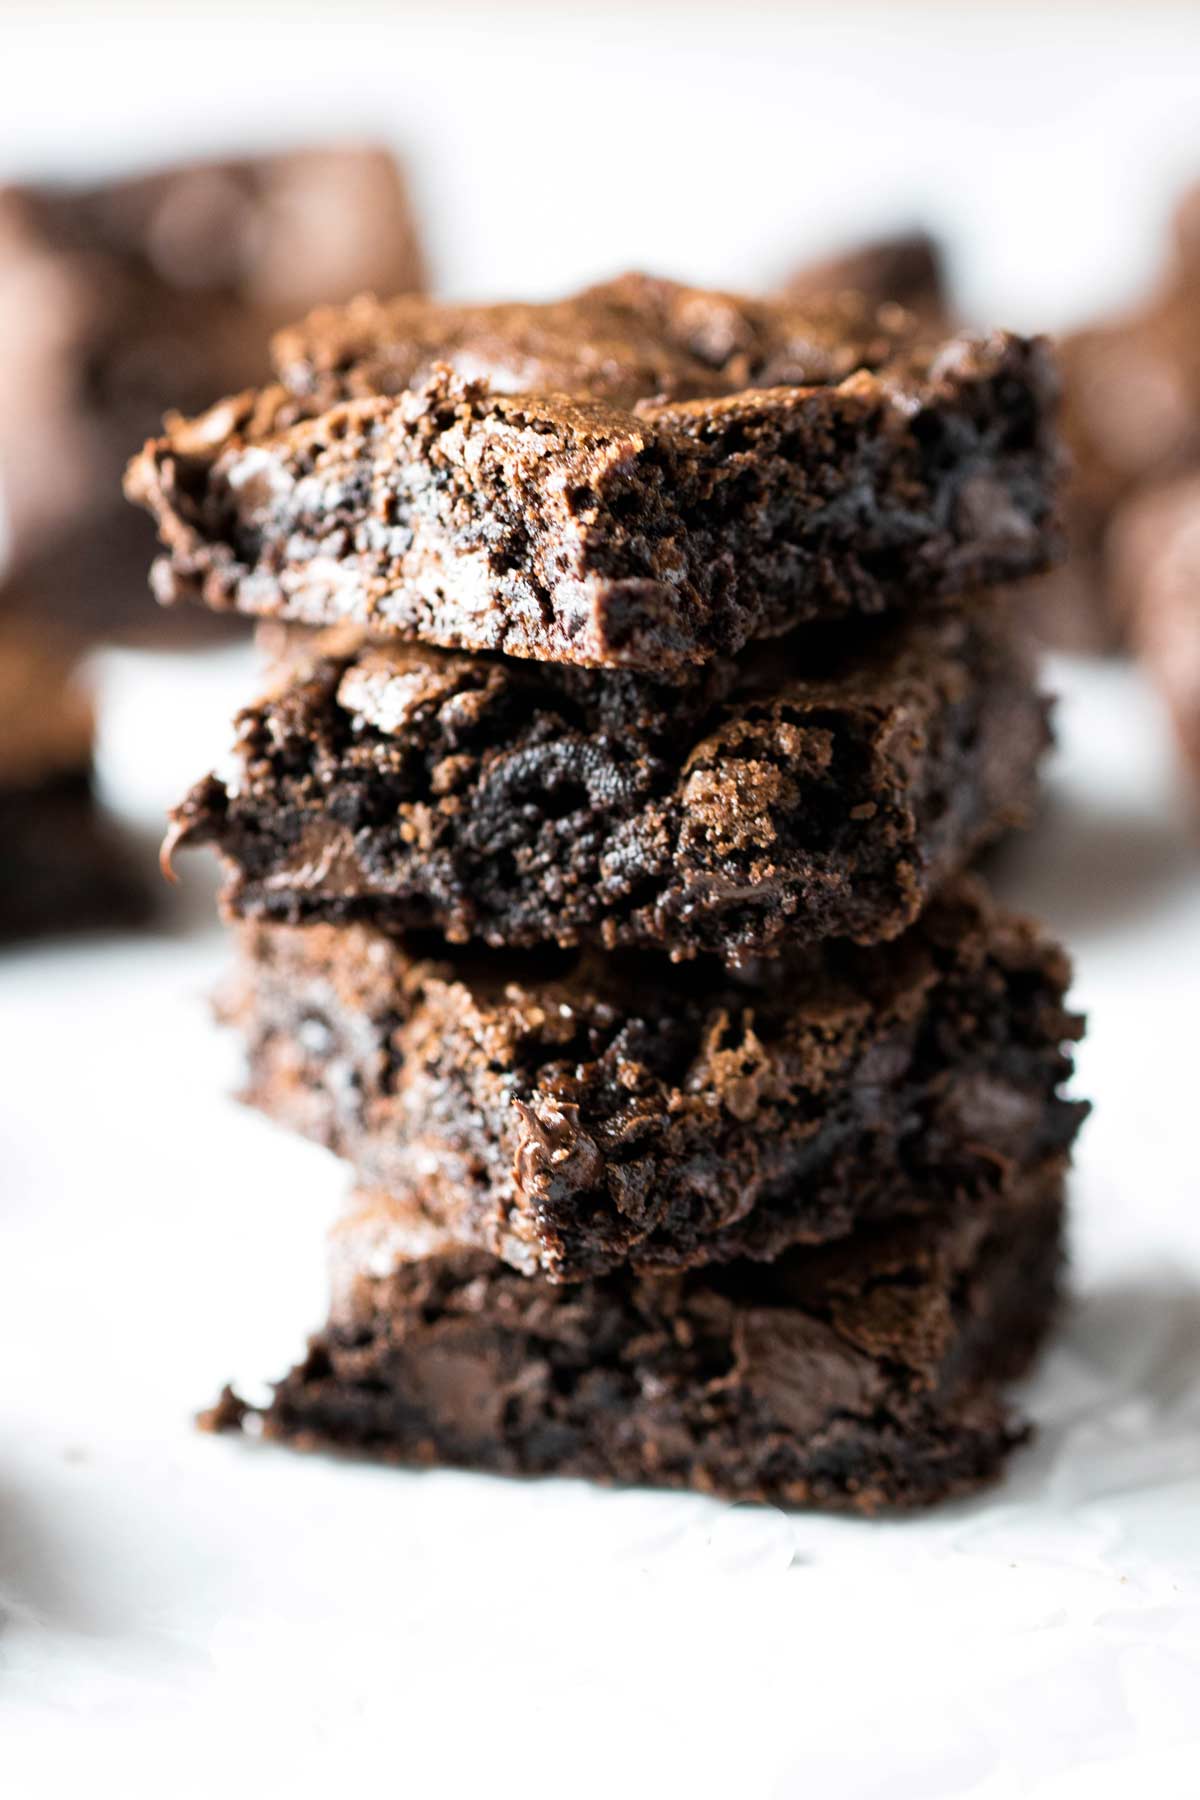 photo of a stack of three brownies